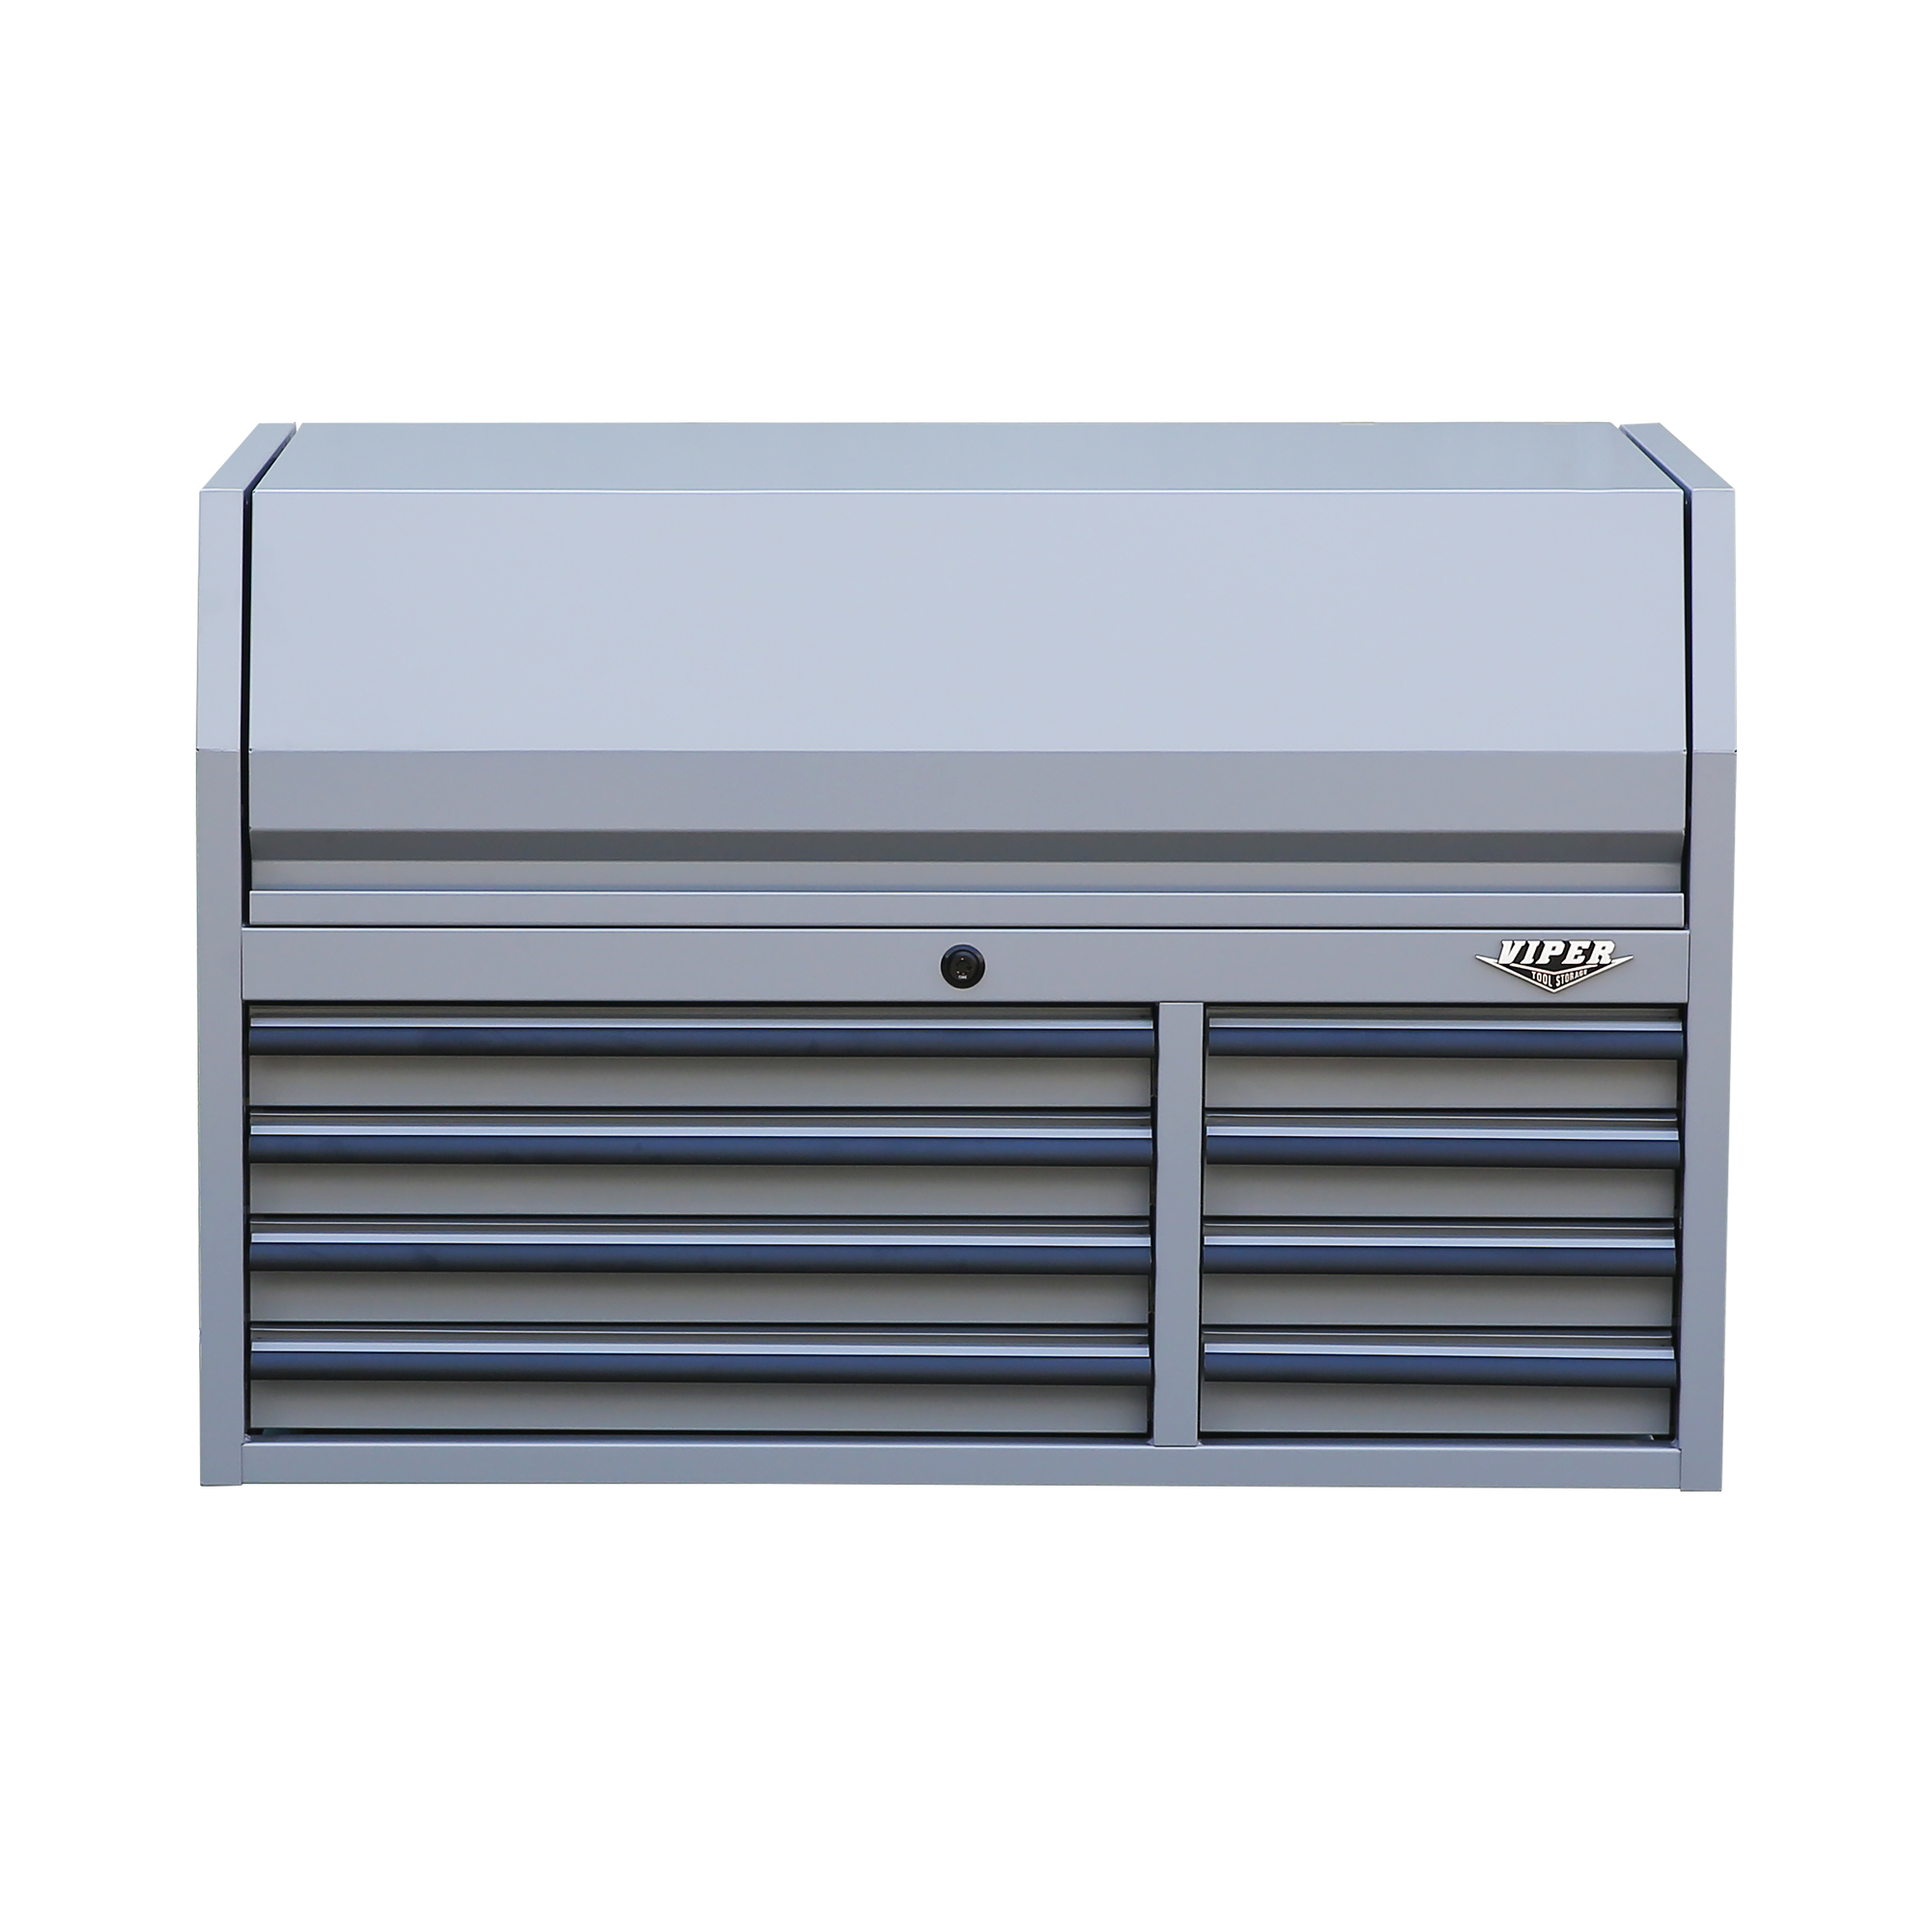 Viper Tool Storage, 8-Drawer Top Chest, Sonic Gray, Width 40.9 in, Height 26.6 in, Color Gray, Model V4108GRAYC